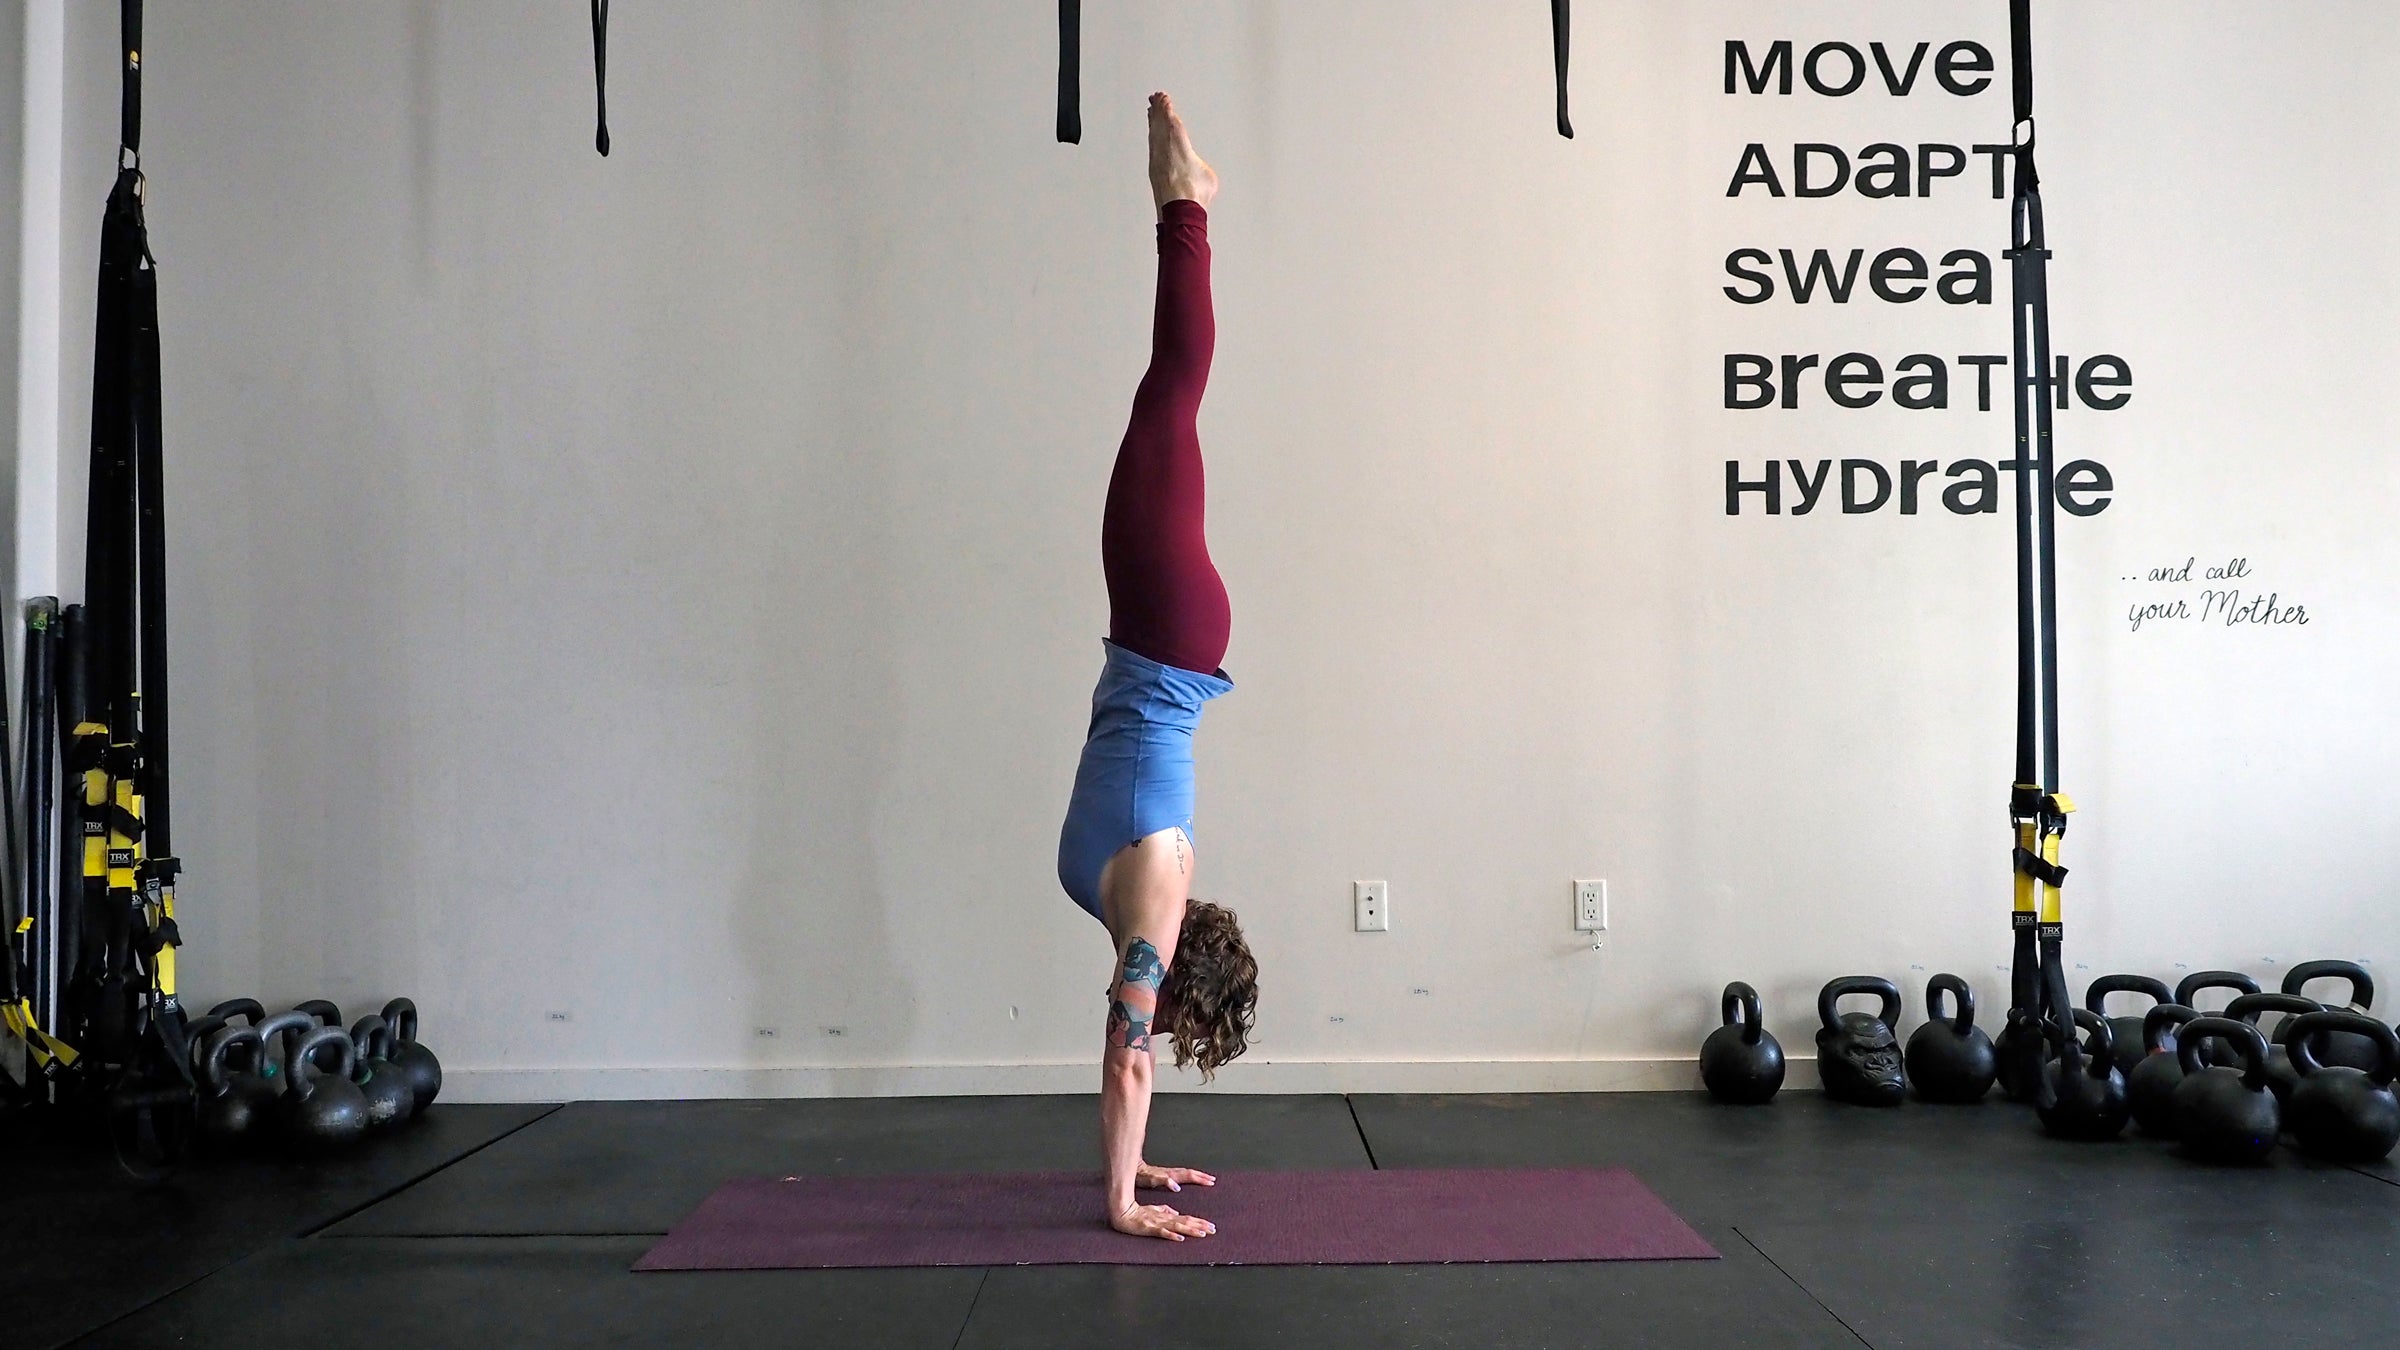 Handstand | Yoga handstand, Yoga sequences, Morning yoga sequences